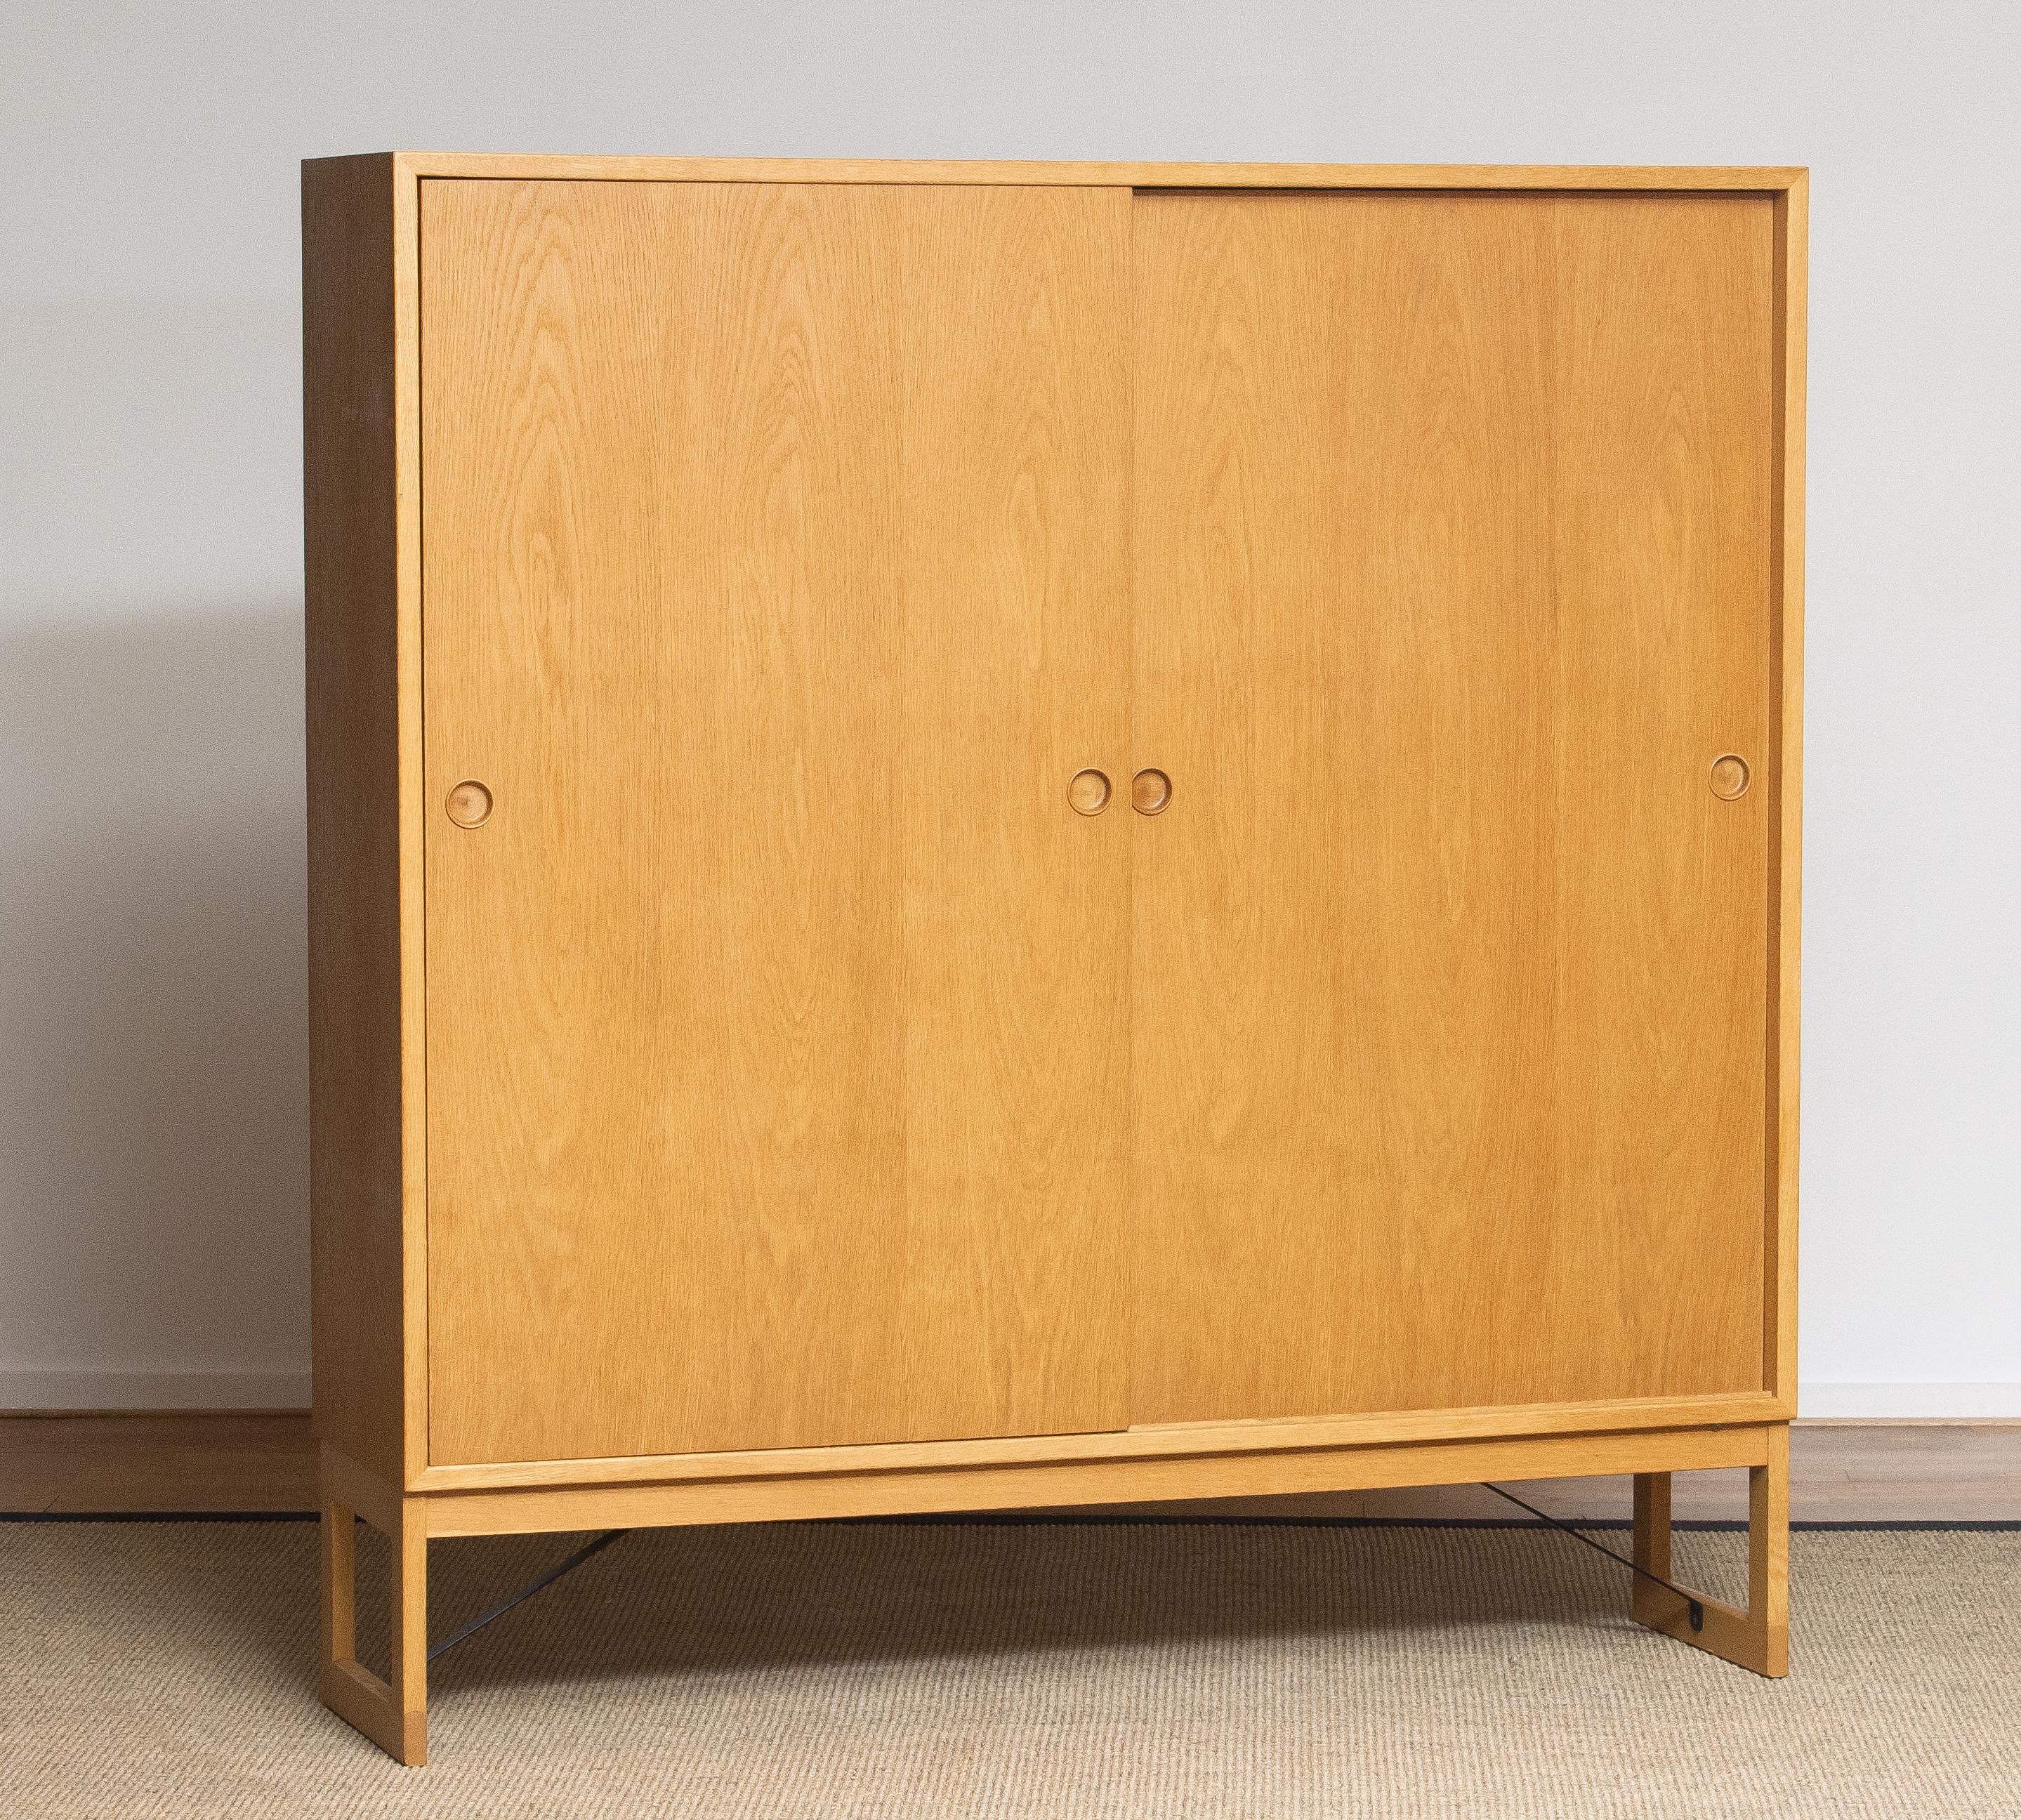 Beautiful and slim cabinet designed by Børge Mogensen for Karl Andersson & Söner, Sweden.
Consist two oak sliding doors seven oak shelves and six drawers. The drawers as well as the shelf’s are all adjustable.
The overall condition very good!